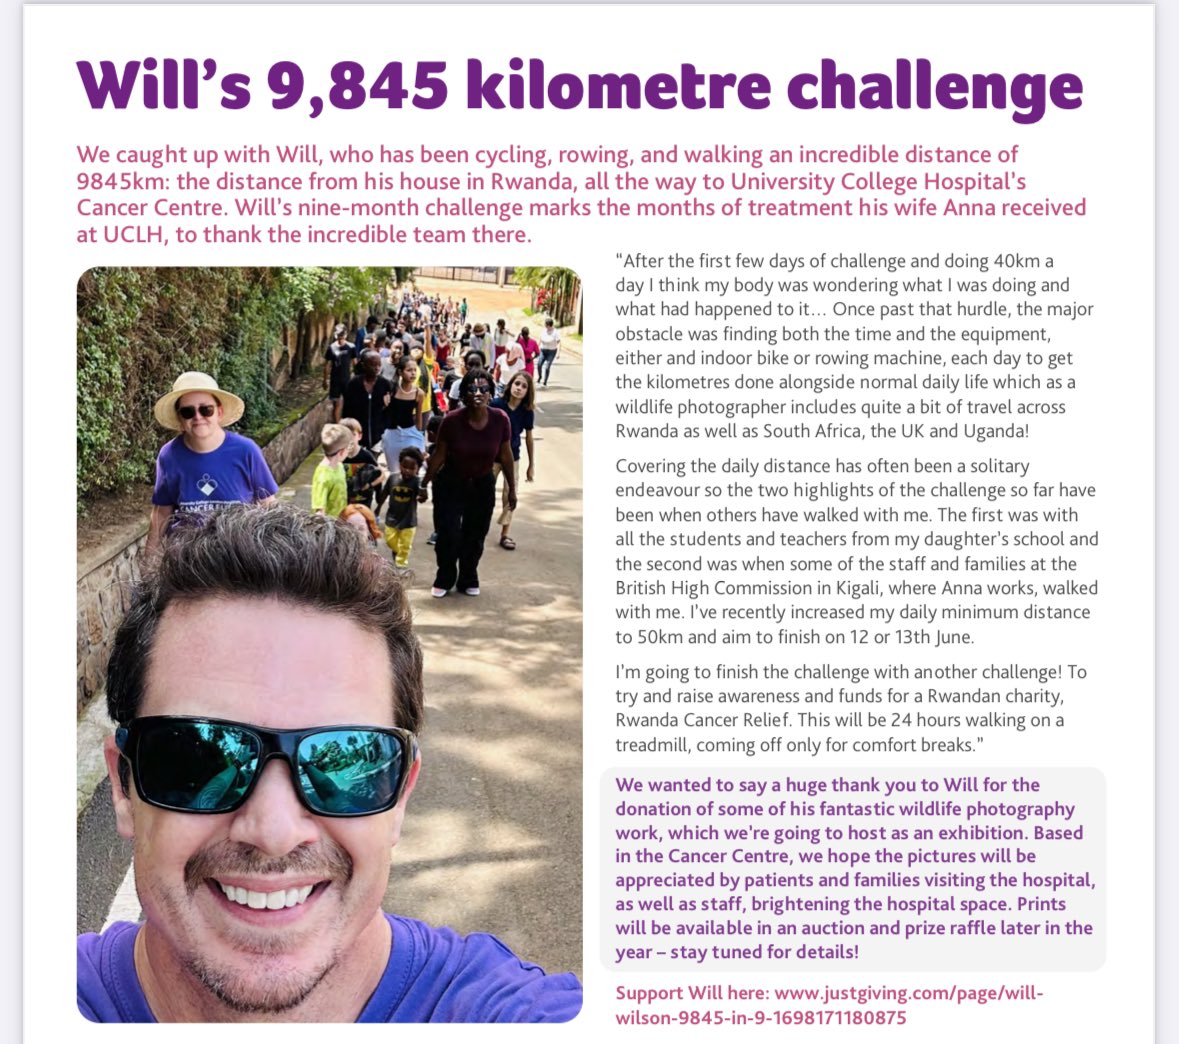 On the day I passed 8,850km, my story made the @UCLHCharity Newsletter. LESS than 1,000km to go of this challenge to go! 

To read in full click - uclhcancerfund.org.uk/application/fi…